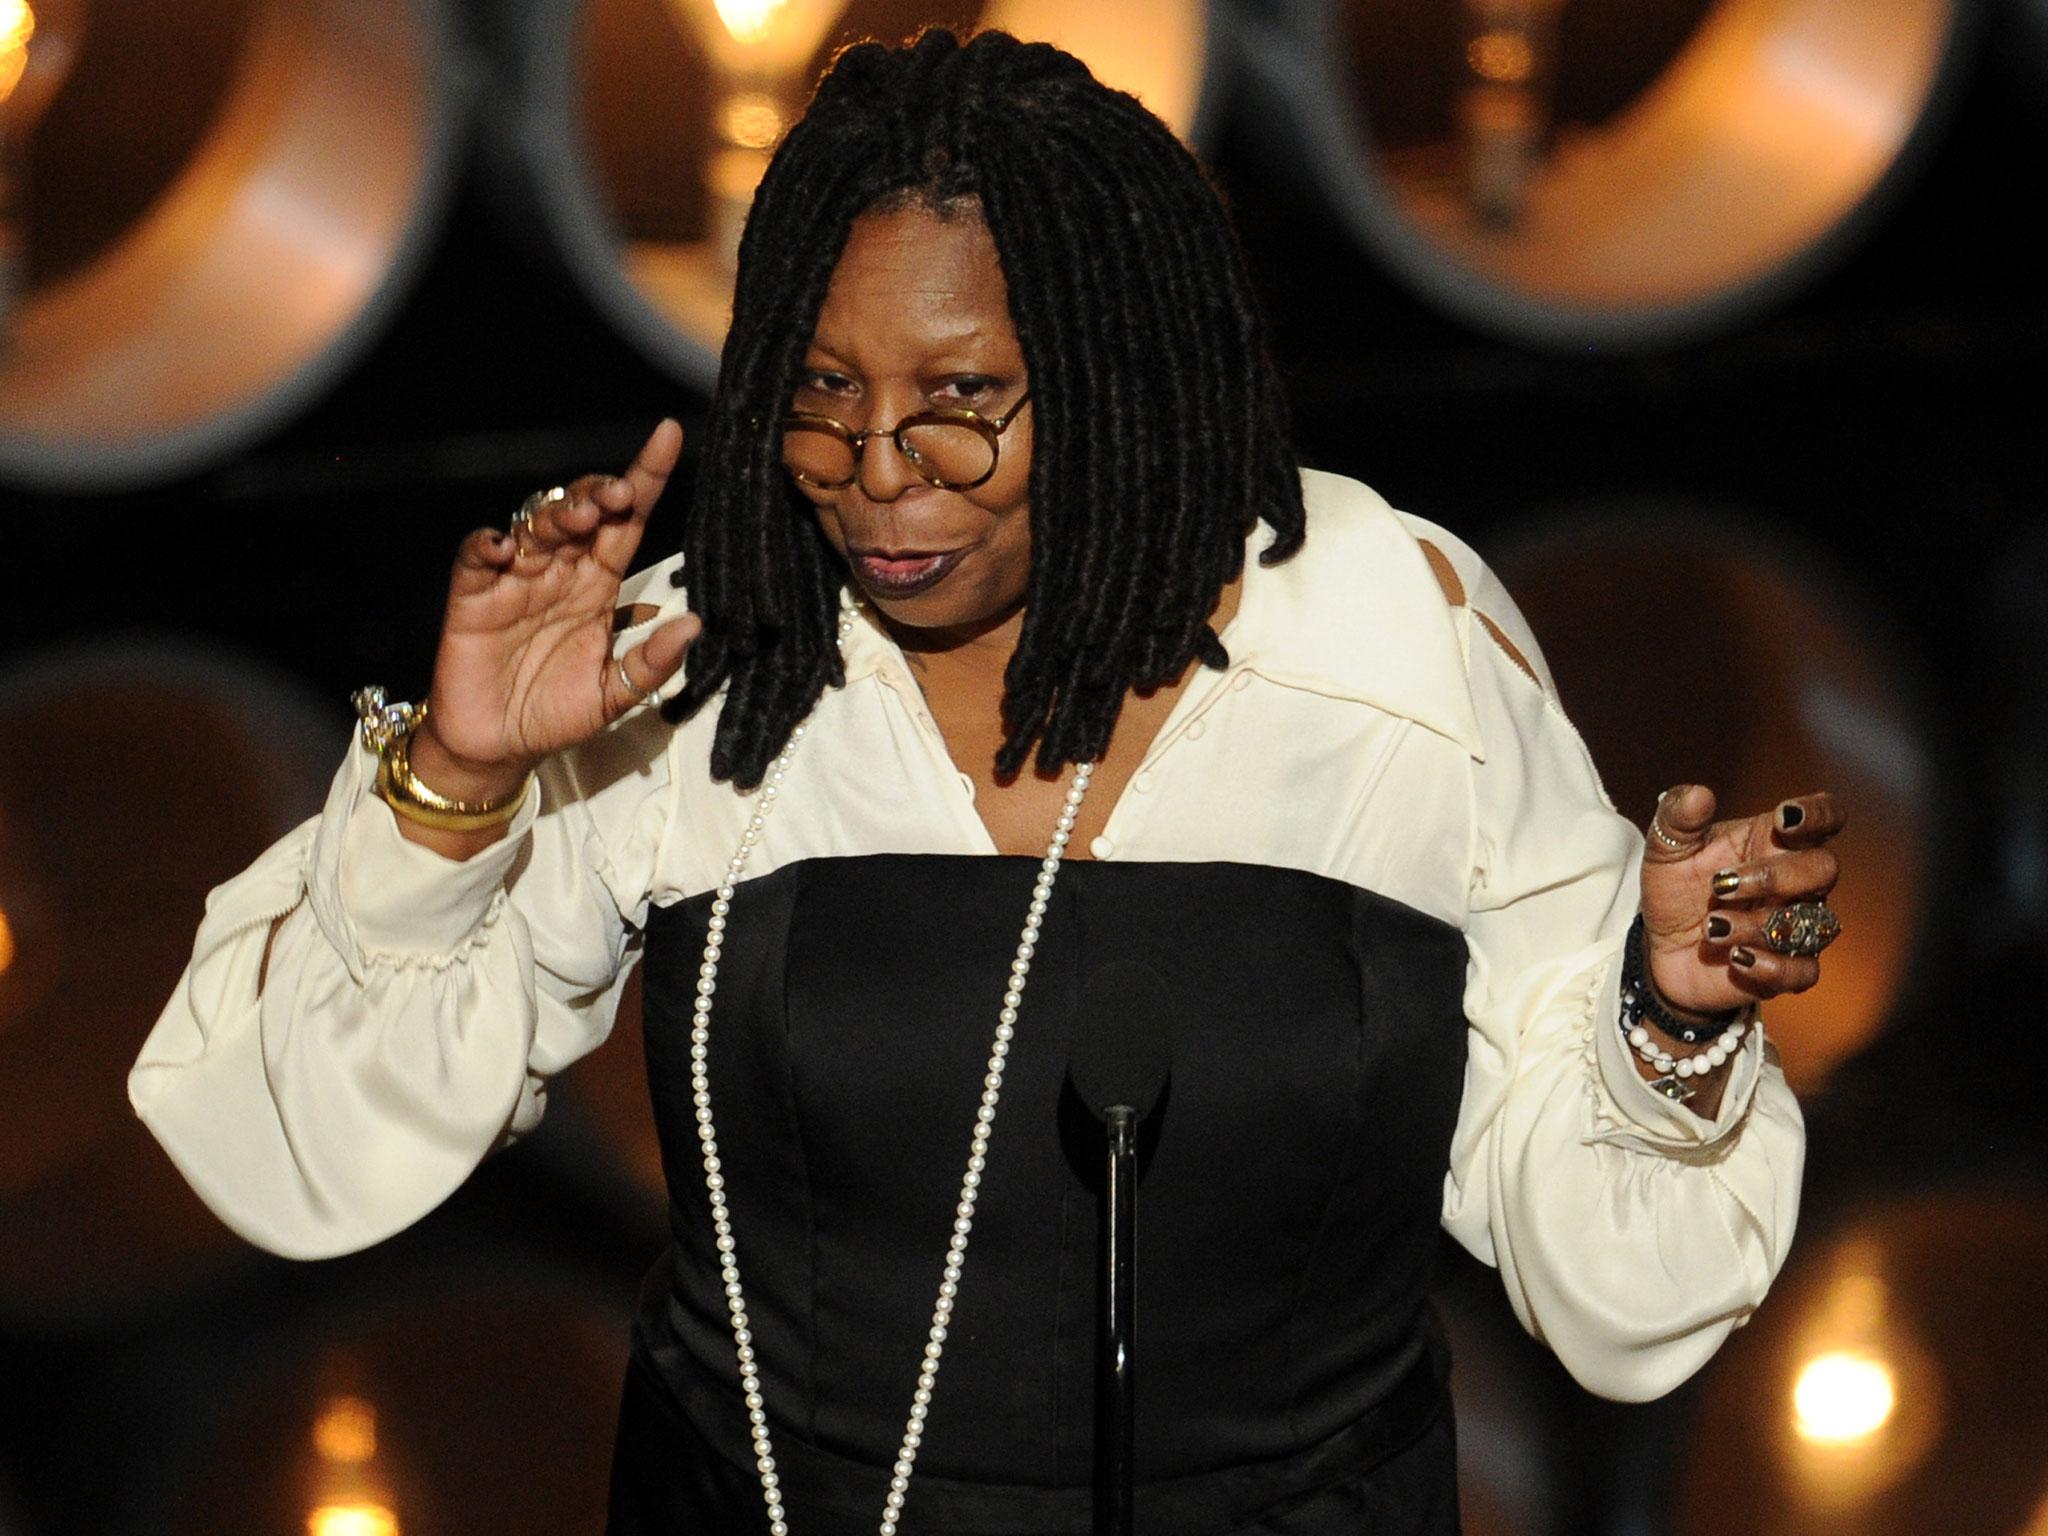 Whoopi Goldberg is one of few actors to have won an Emmy, Grammy, Oscar and Tony